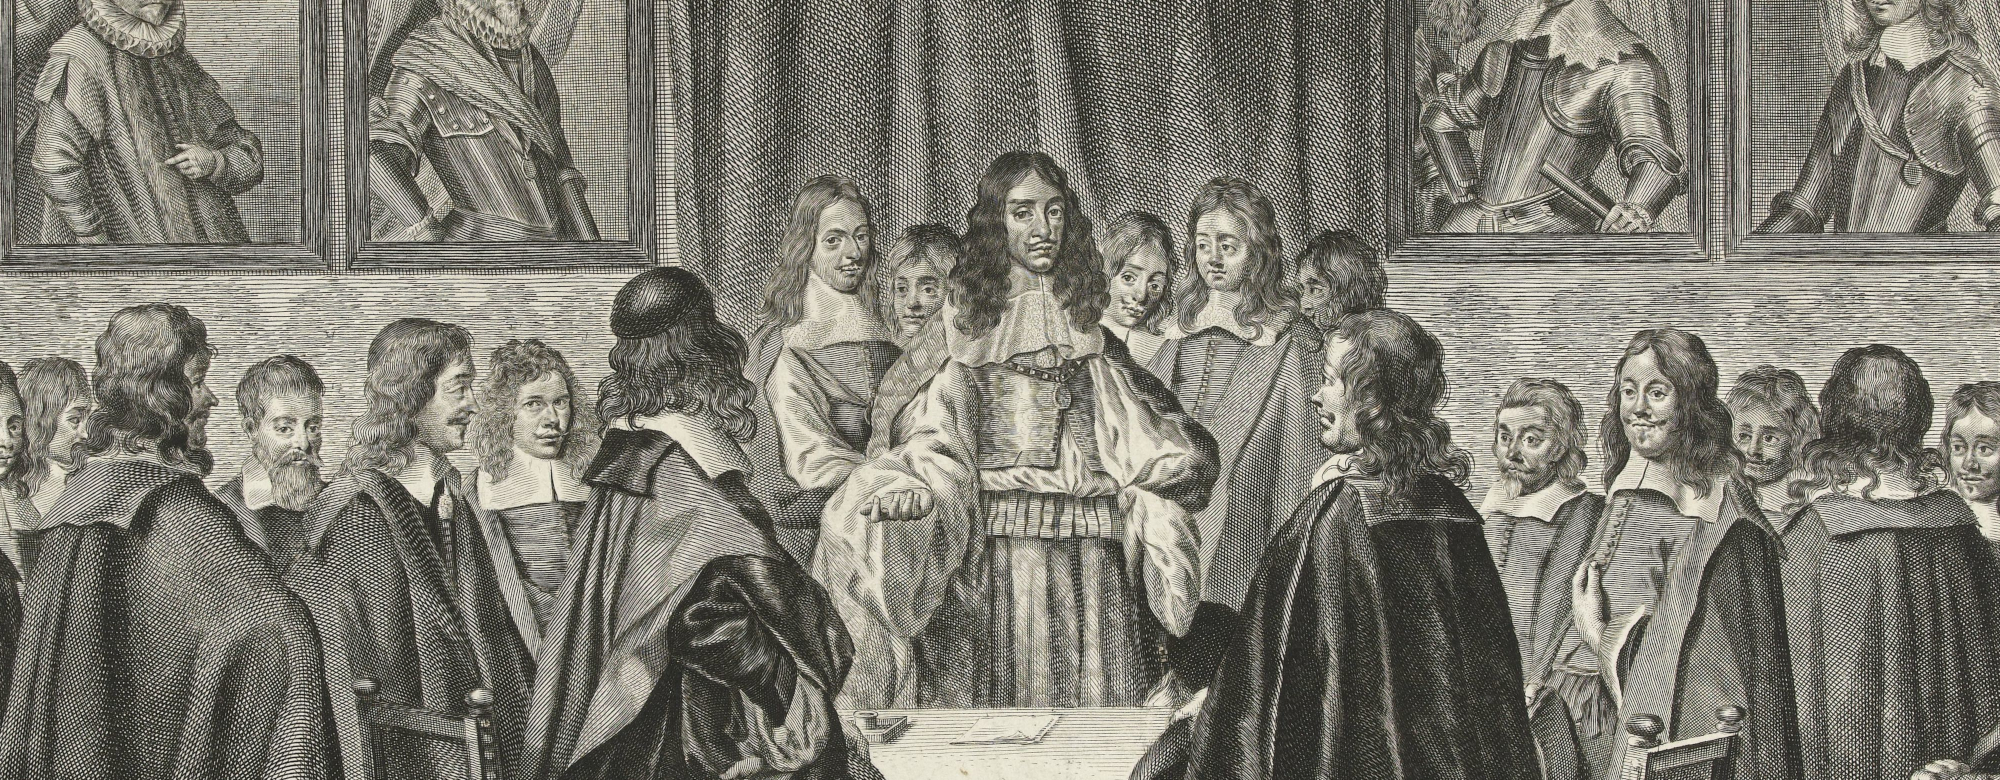 King Charles II of England addresses members of the Estates General, 1660, Theodor Matham, after Jacob Toorenvliet, 1660